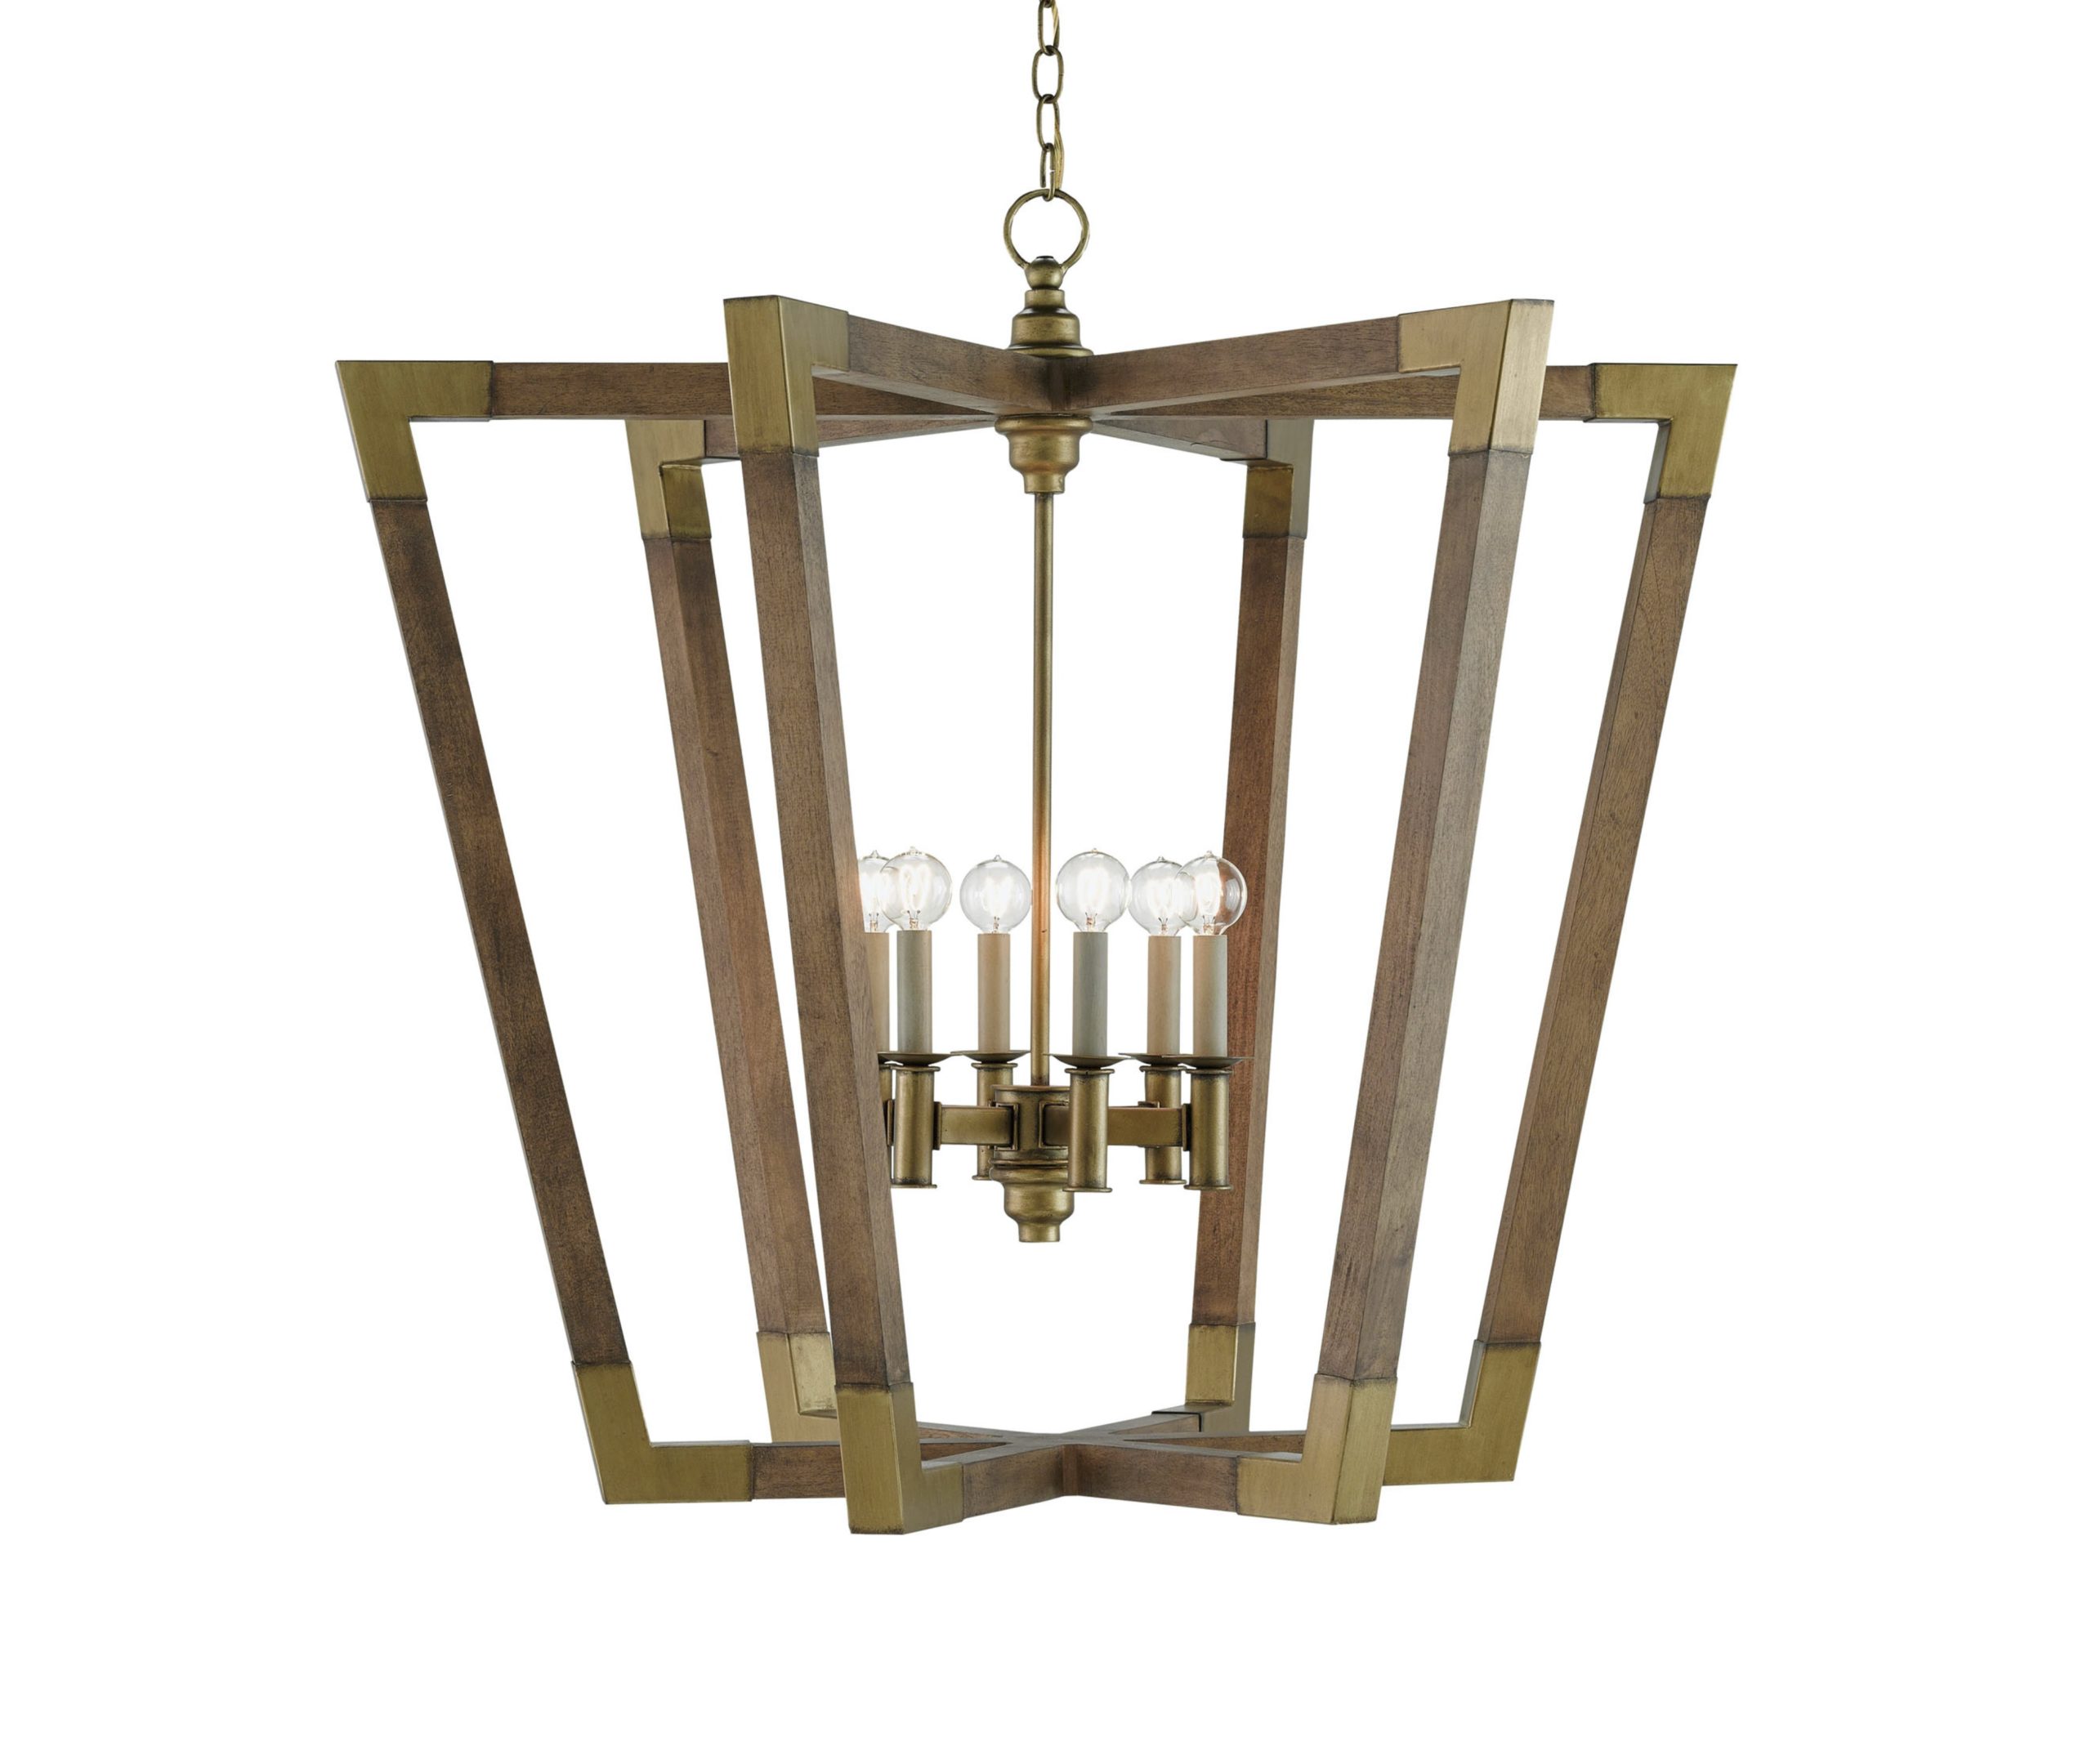 NYDC_WNWN_currey_and_co_products_bastian_large_lantern_9000-0008_